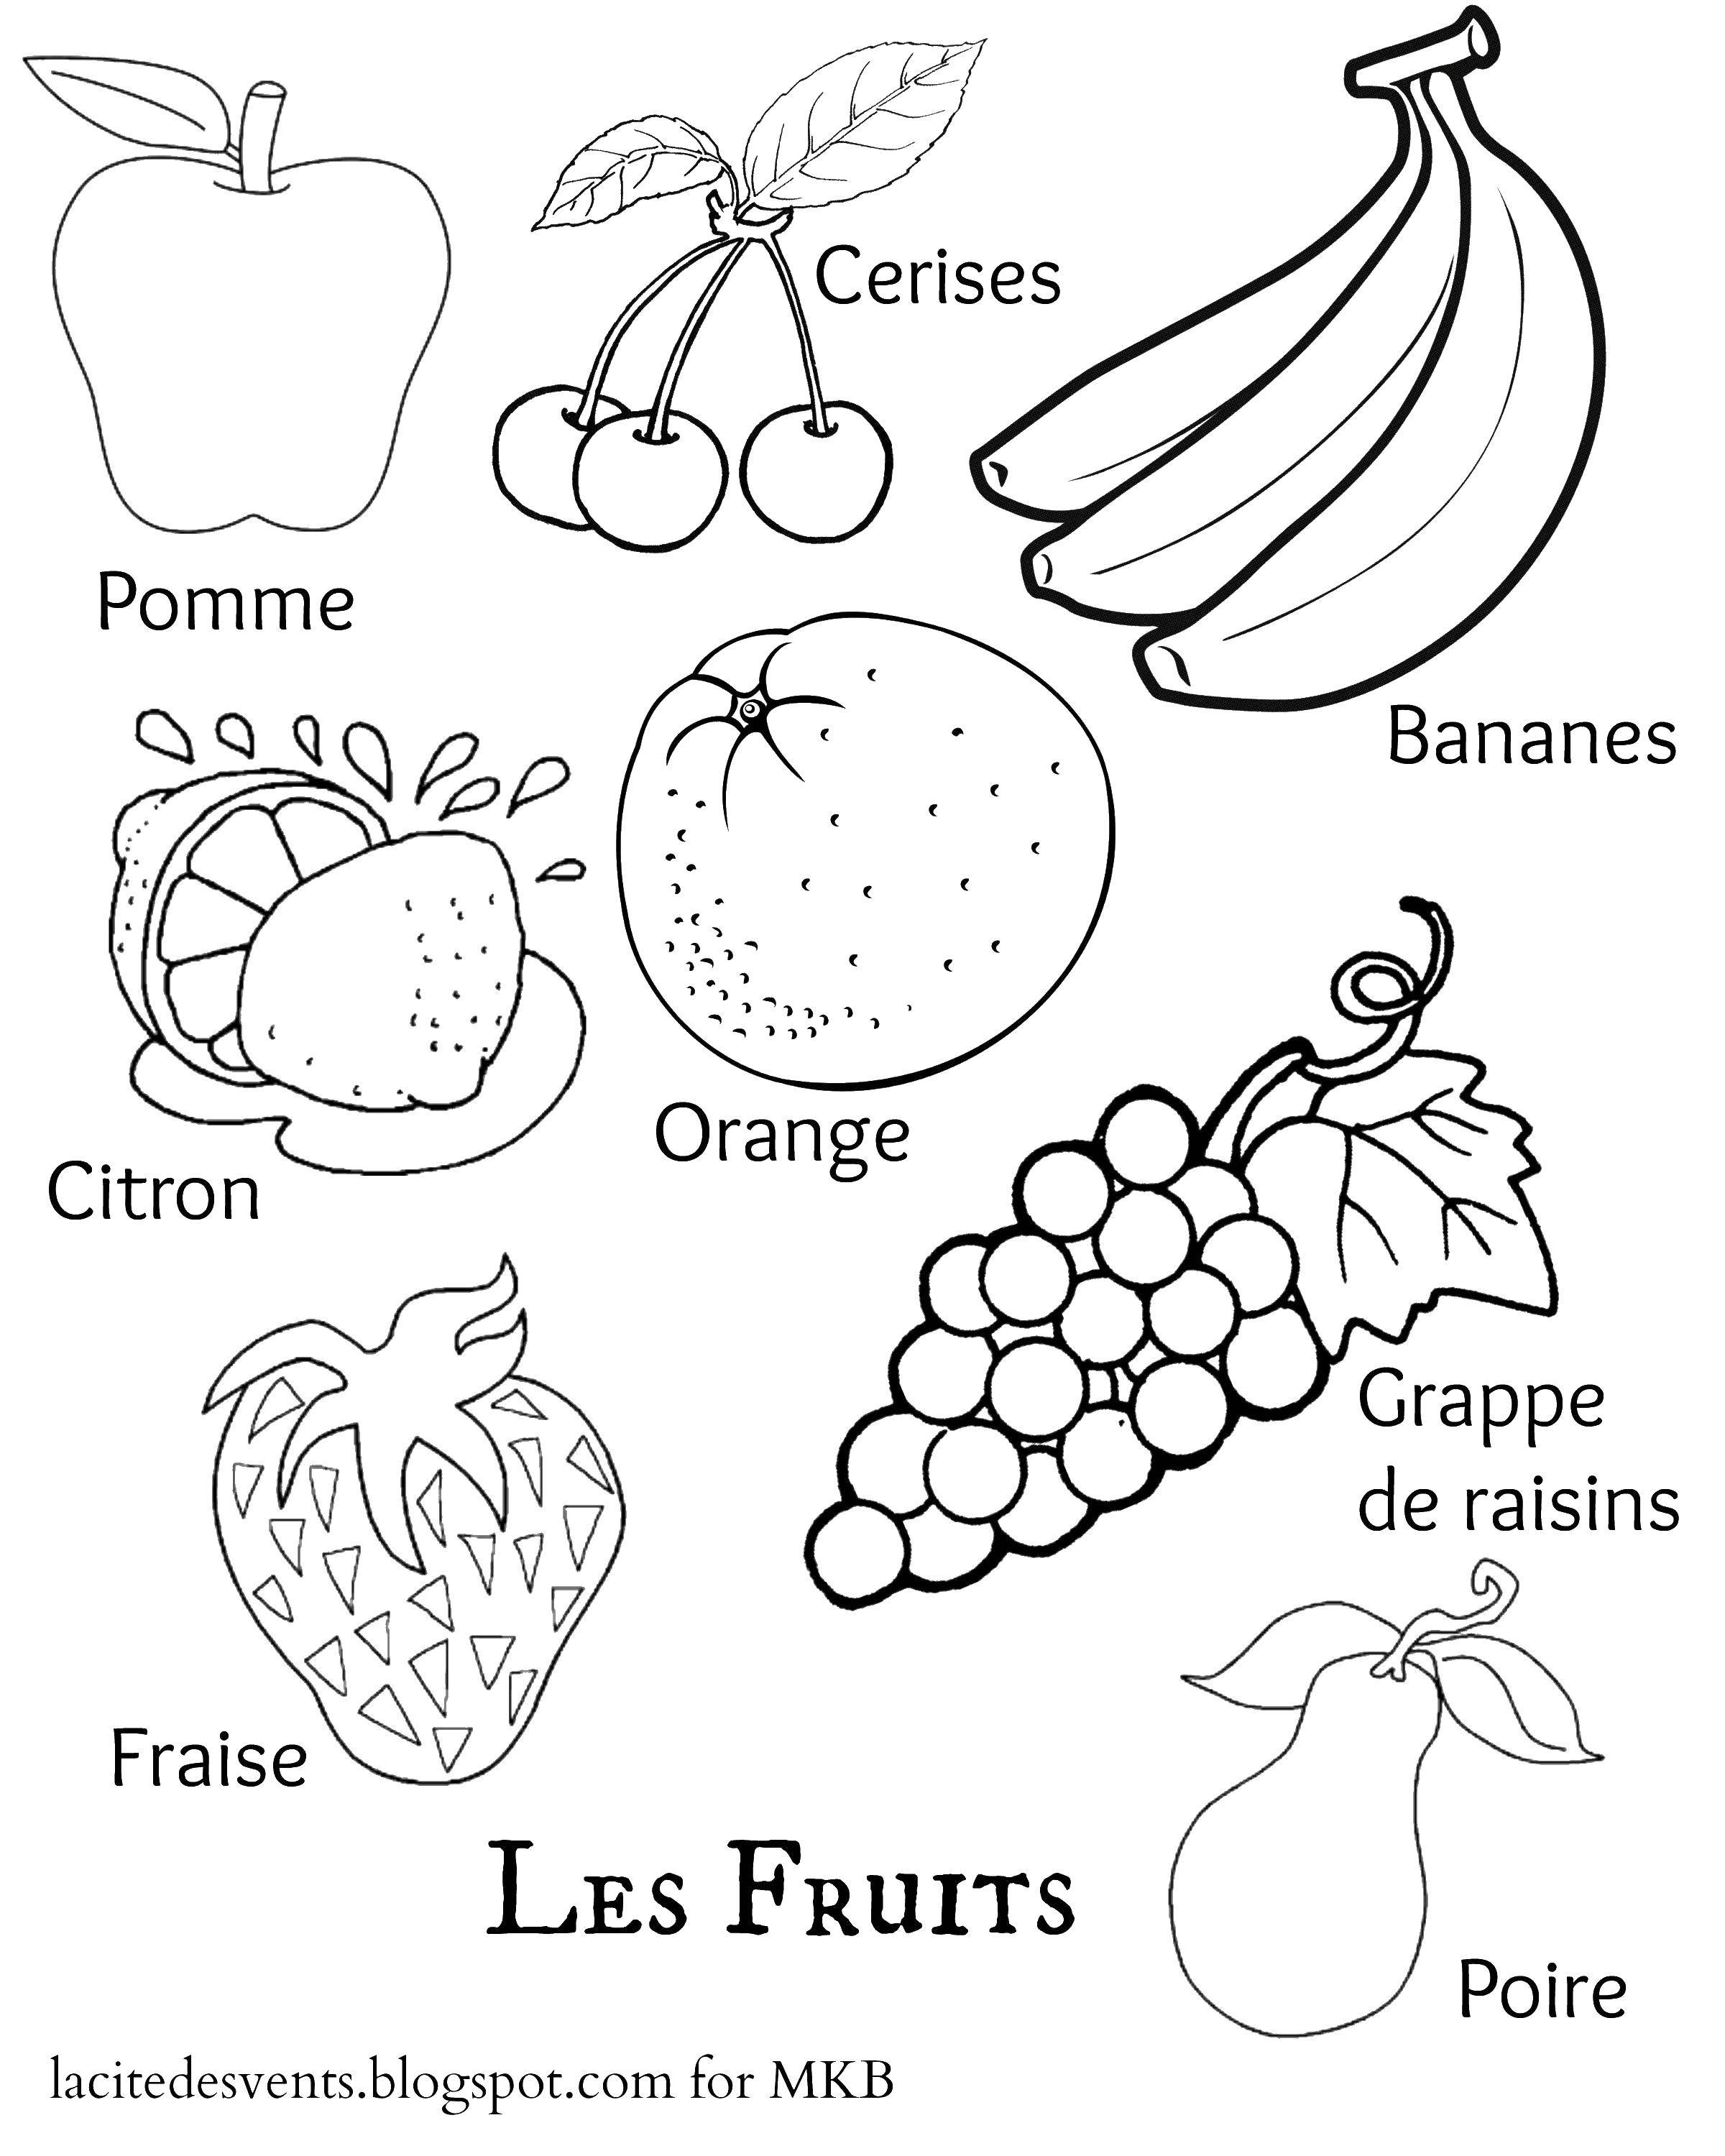 Coloring Different fruits and berries in French. Category fruits. Tags:  fruits, berries, French language.